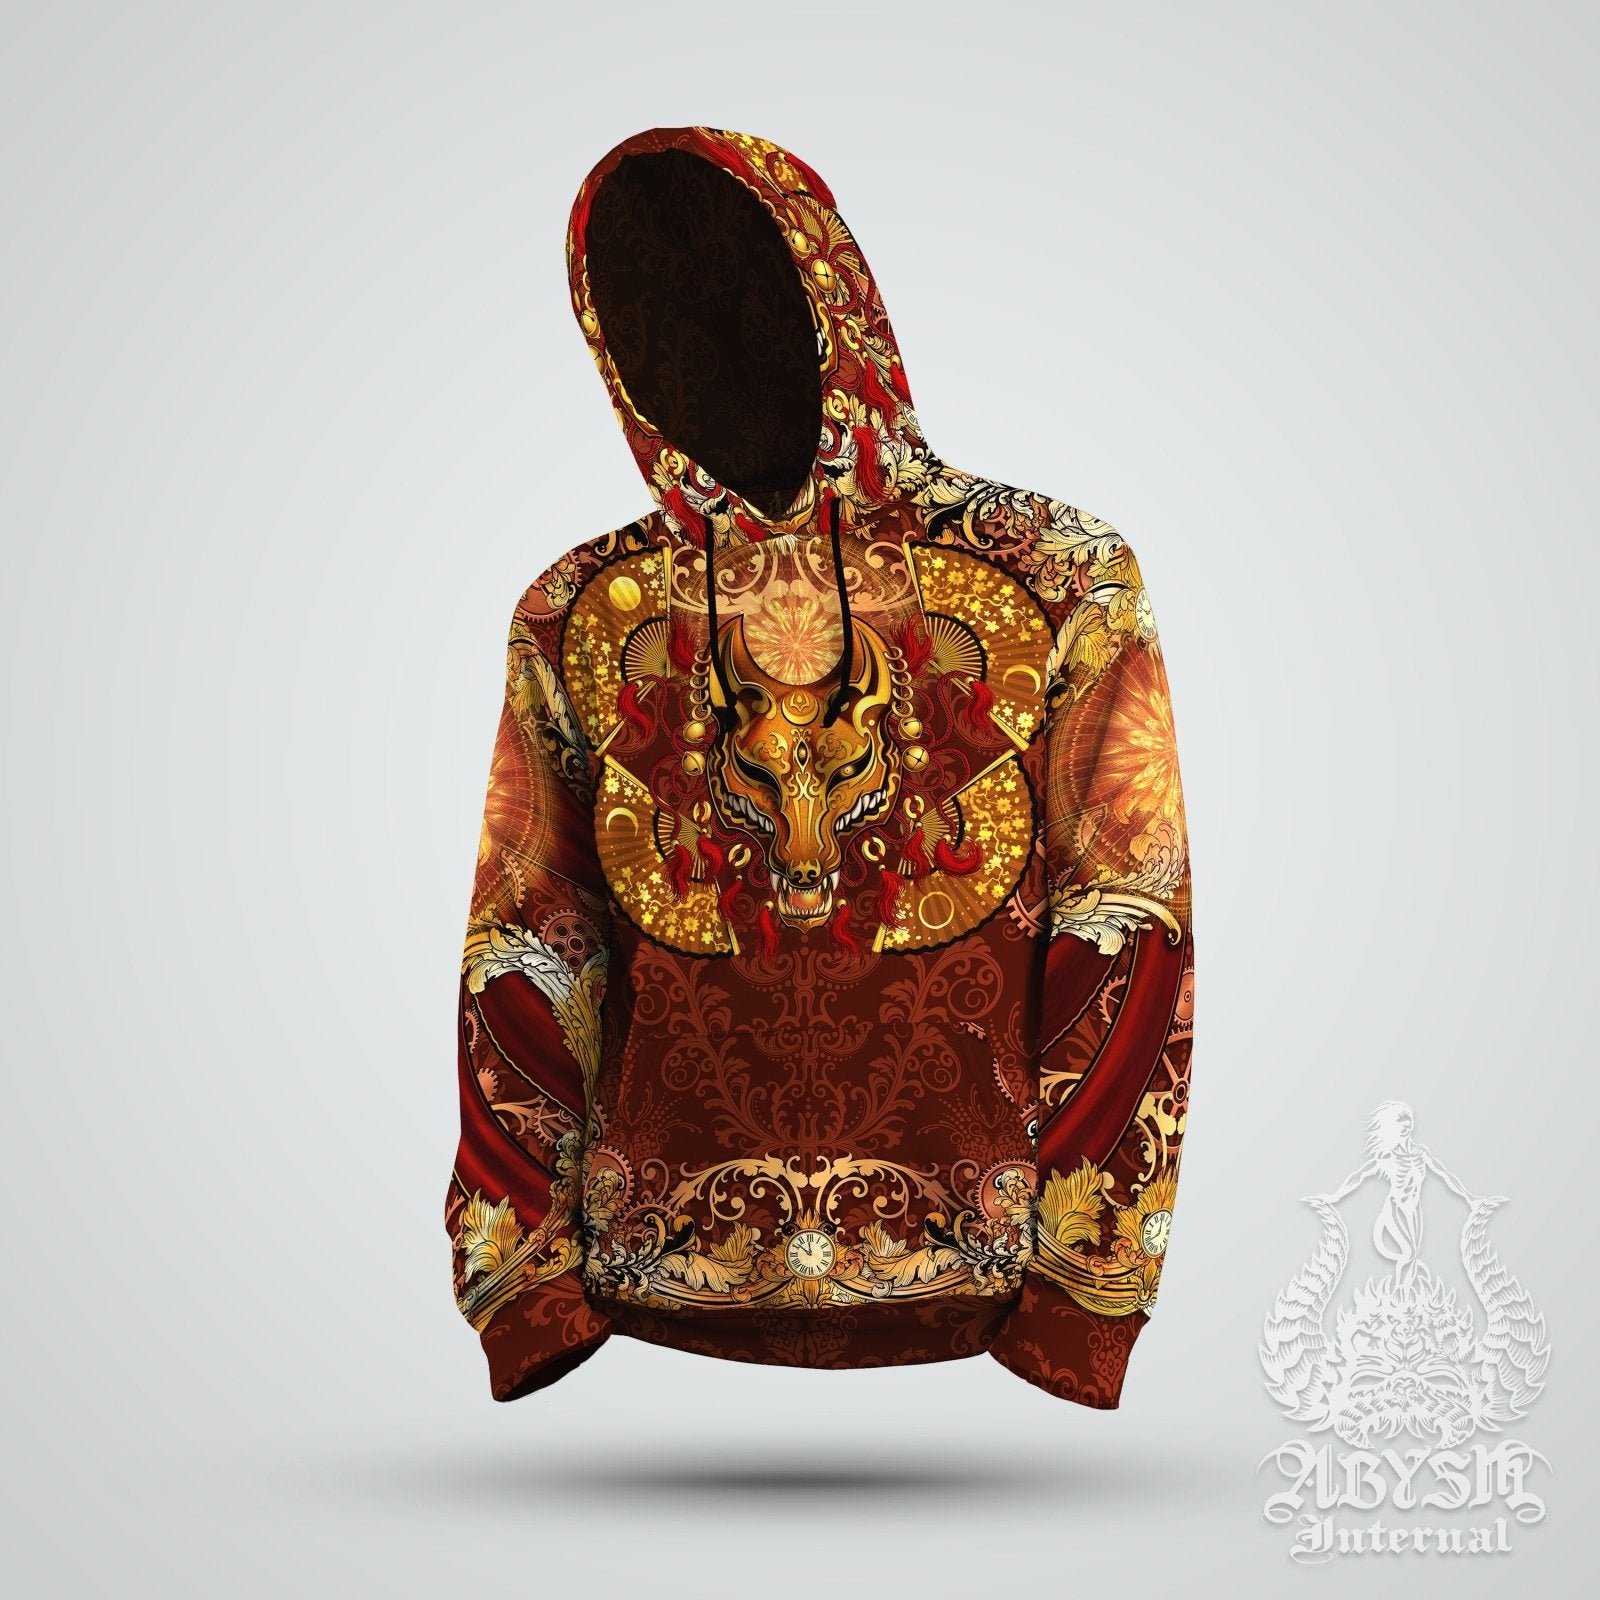 Anime Hoodie, Japanese Streetwear, Steampunk Outfit, Anime Festival Apparel, Alternative Clothing, Unisex - Fox or Kitsune Mask, Red - Abysm Internal